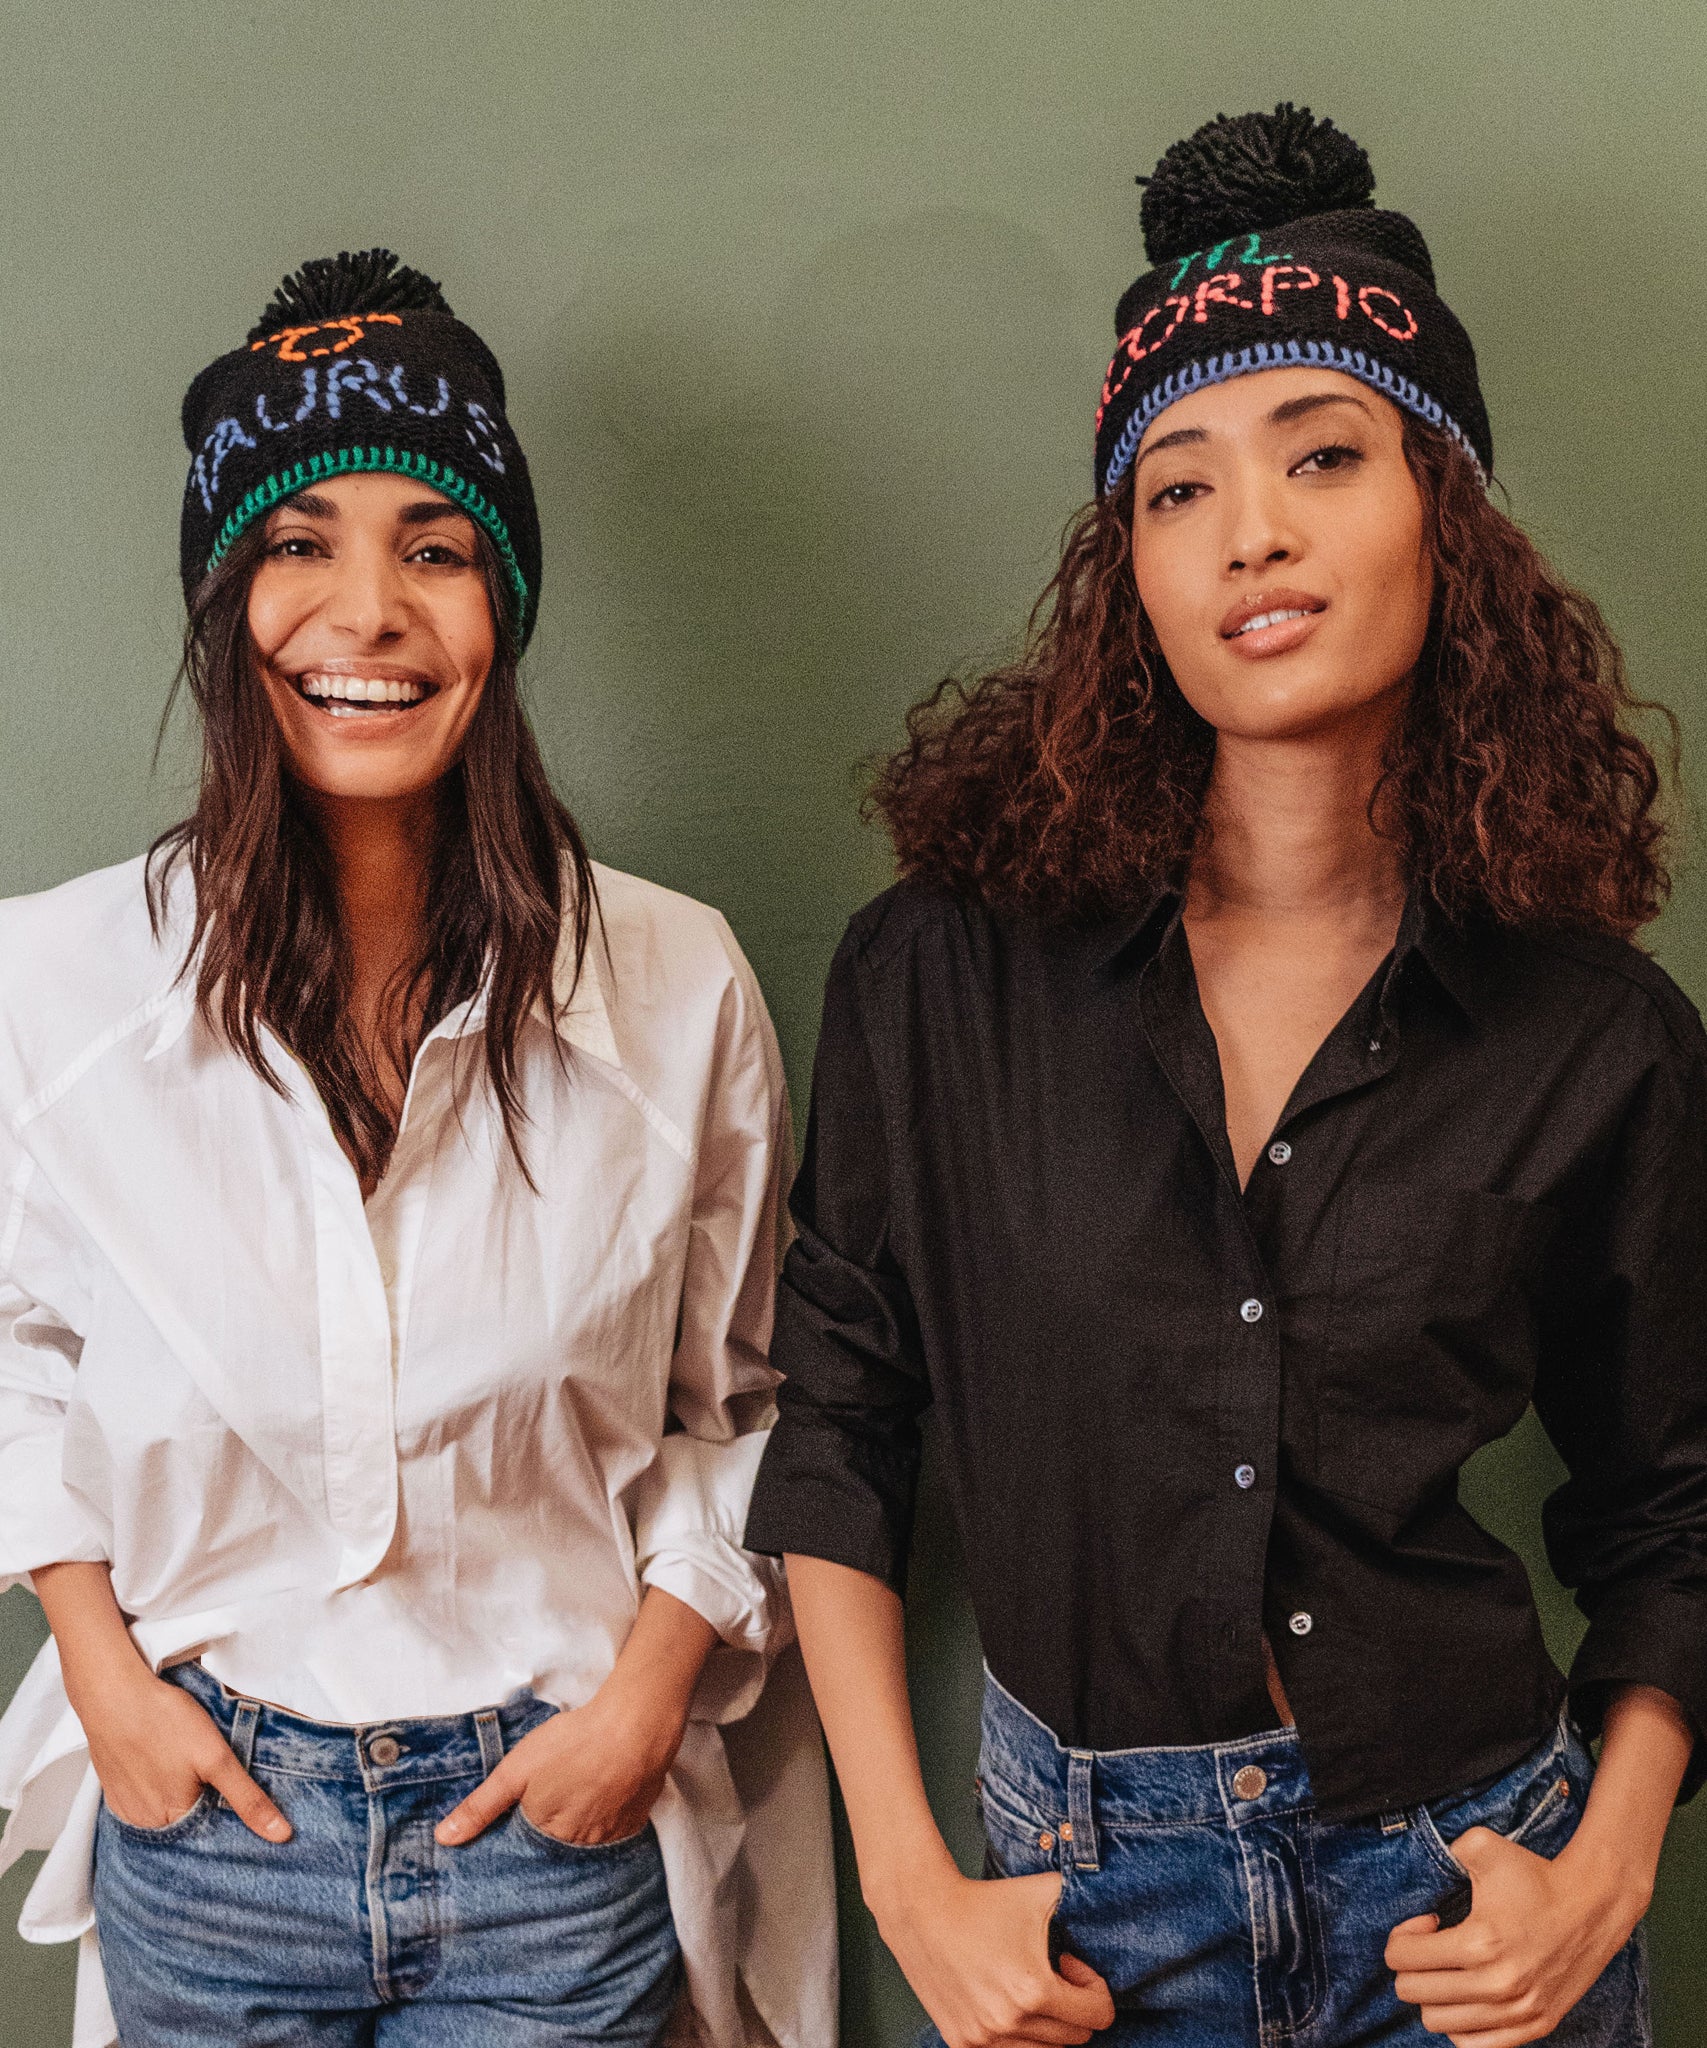 Two models in horoscope beanies.  One is Taurus and one is Scorpio.